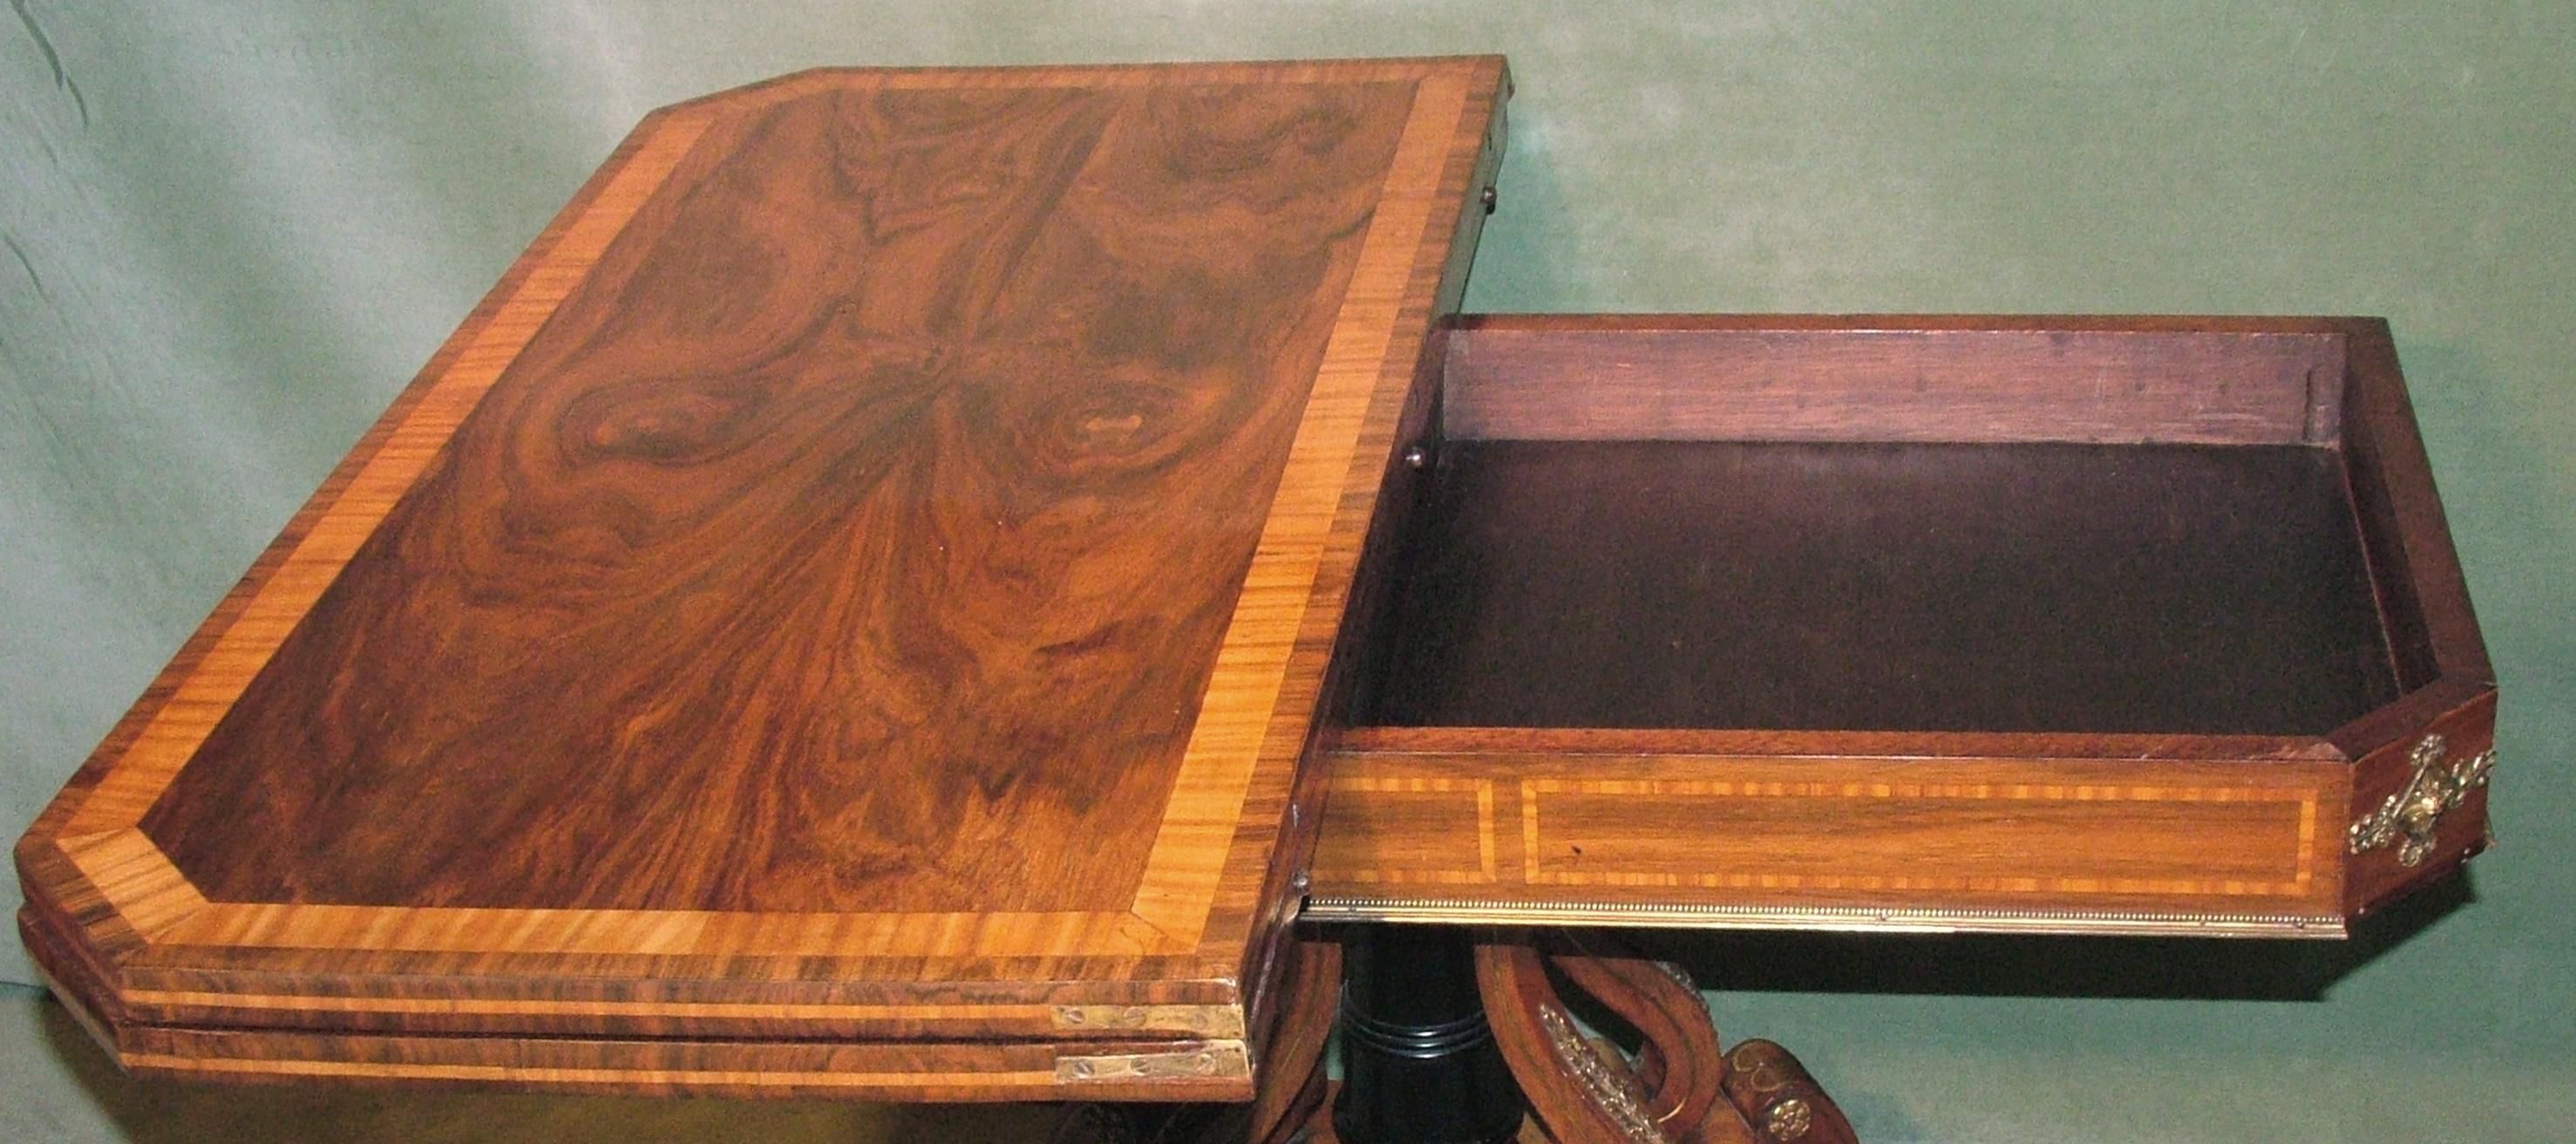 English Regency Period Rosewood Card Table For Sale